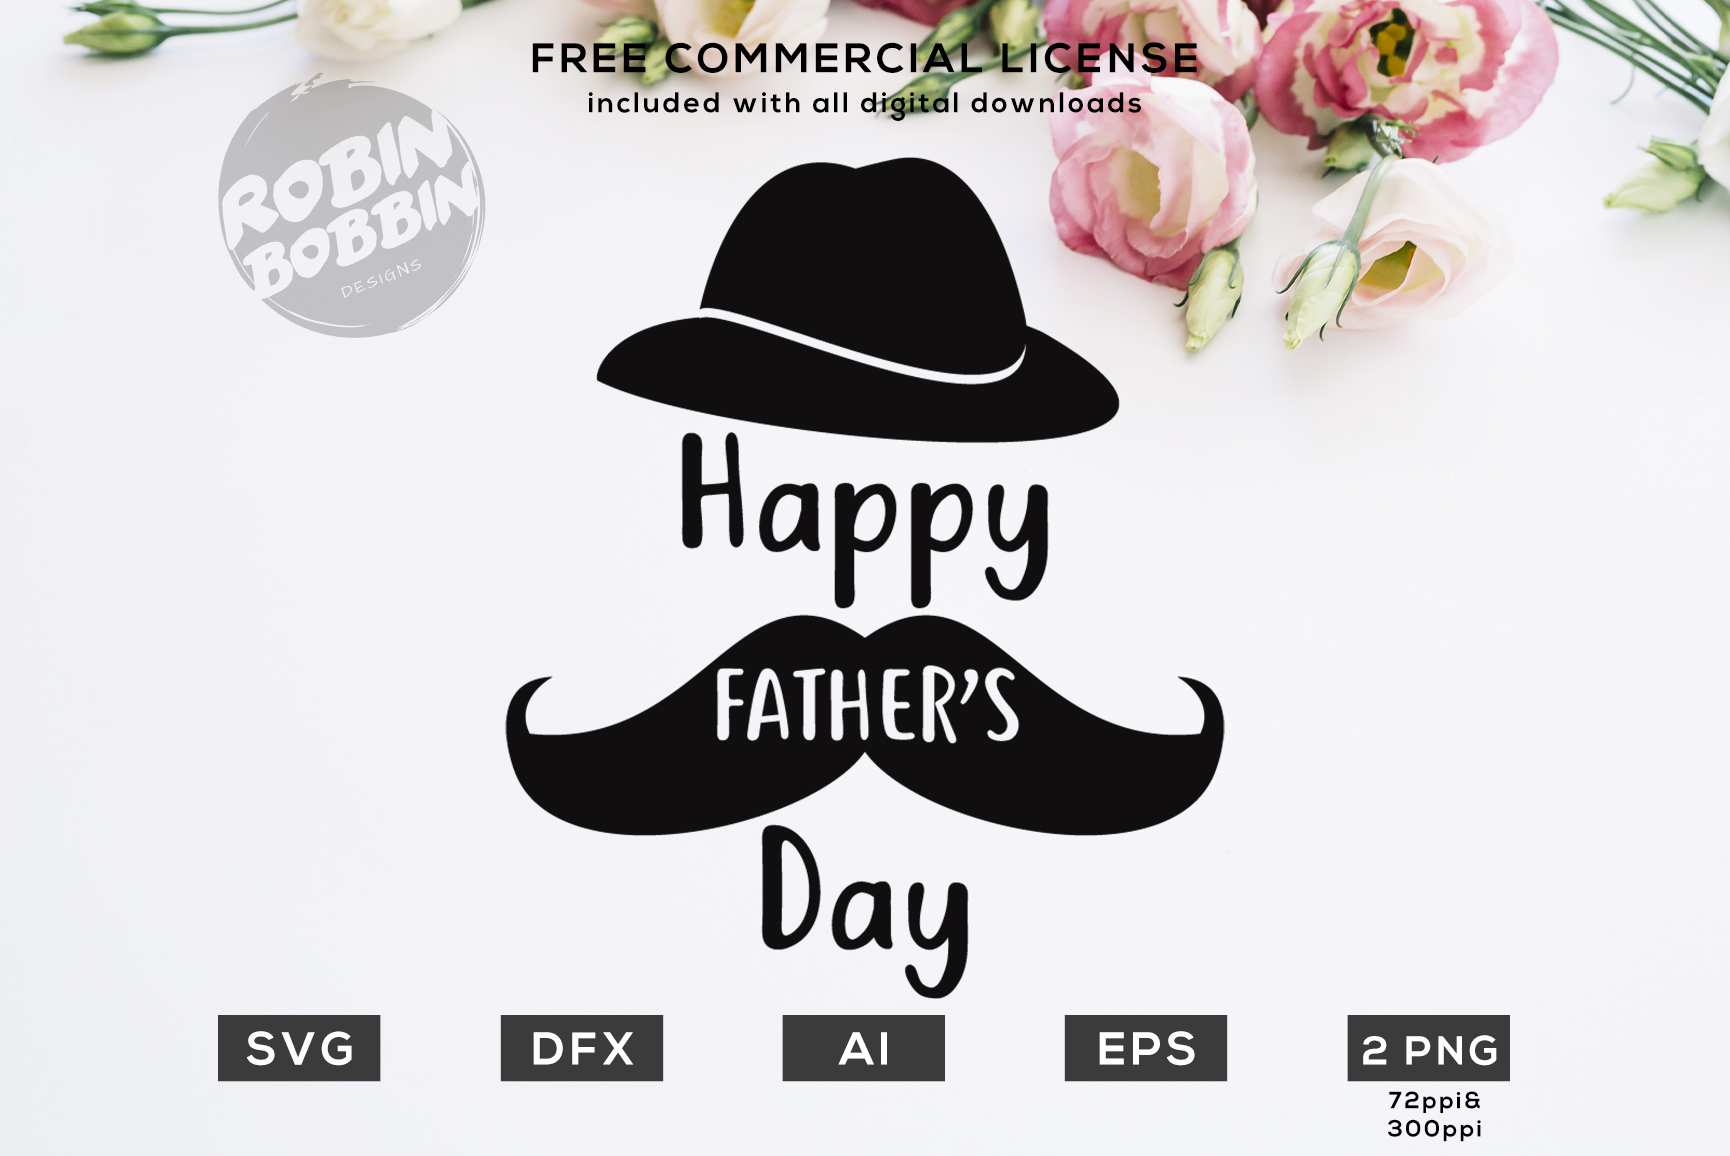 Happy Father's Day Svg - 277+ Crafter Files